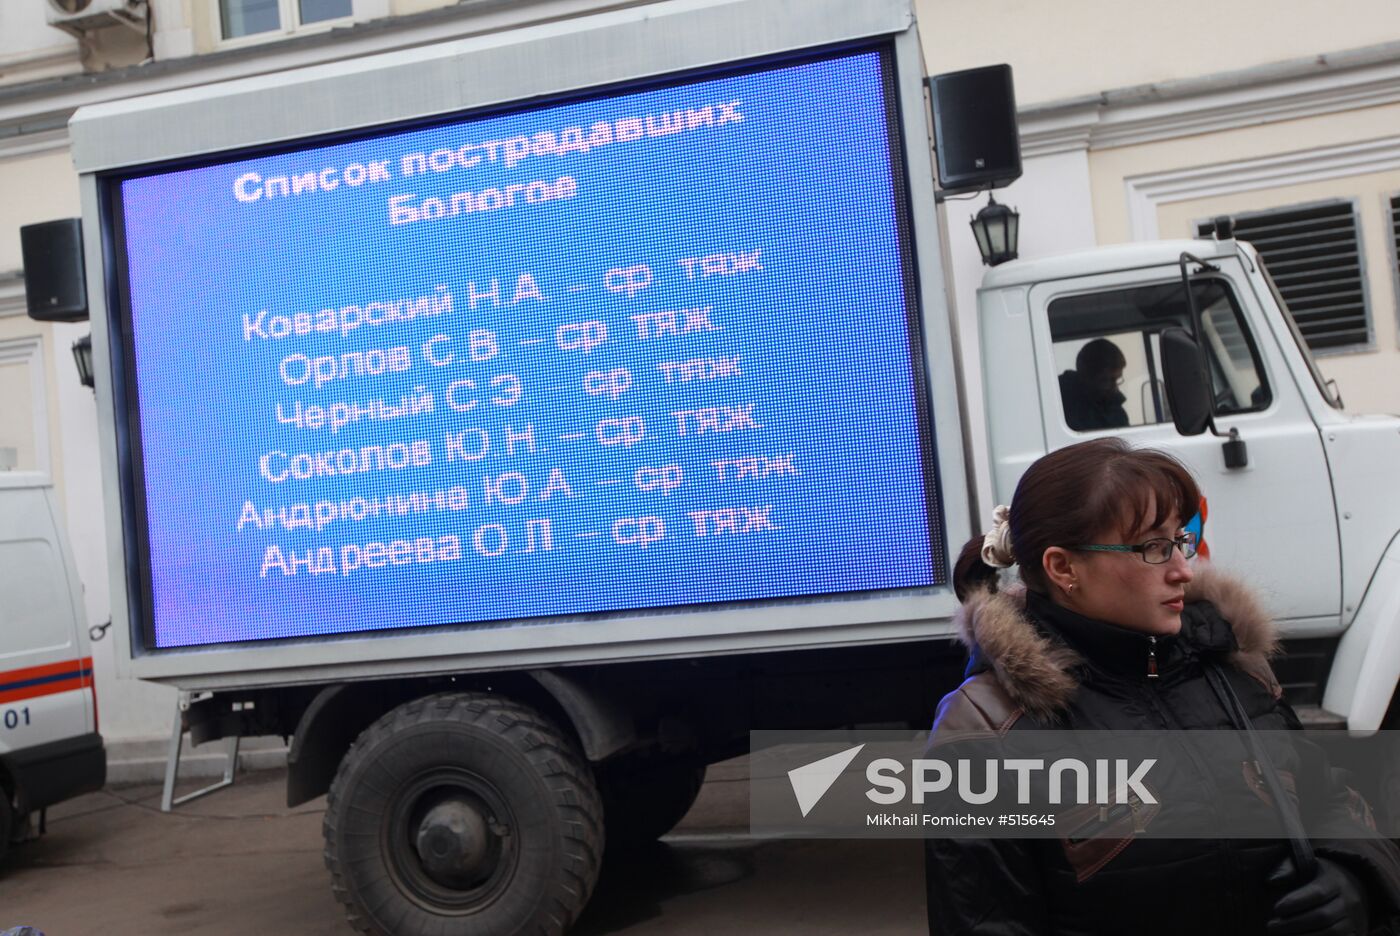 Nevsky Express derailment victims list made available to public